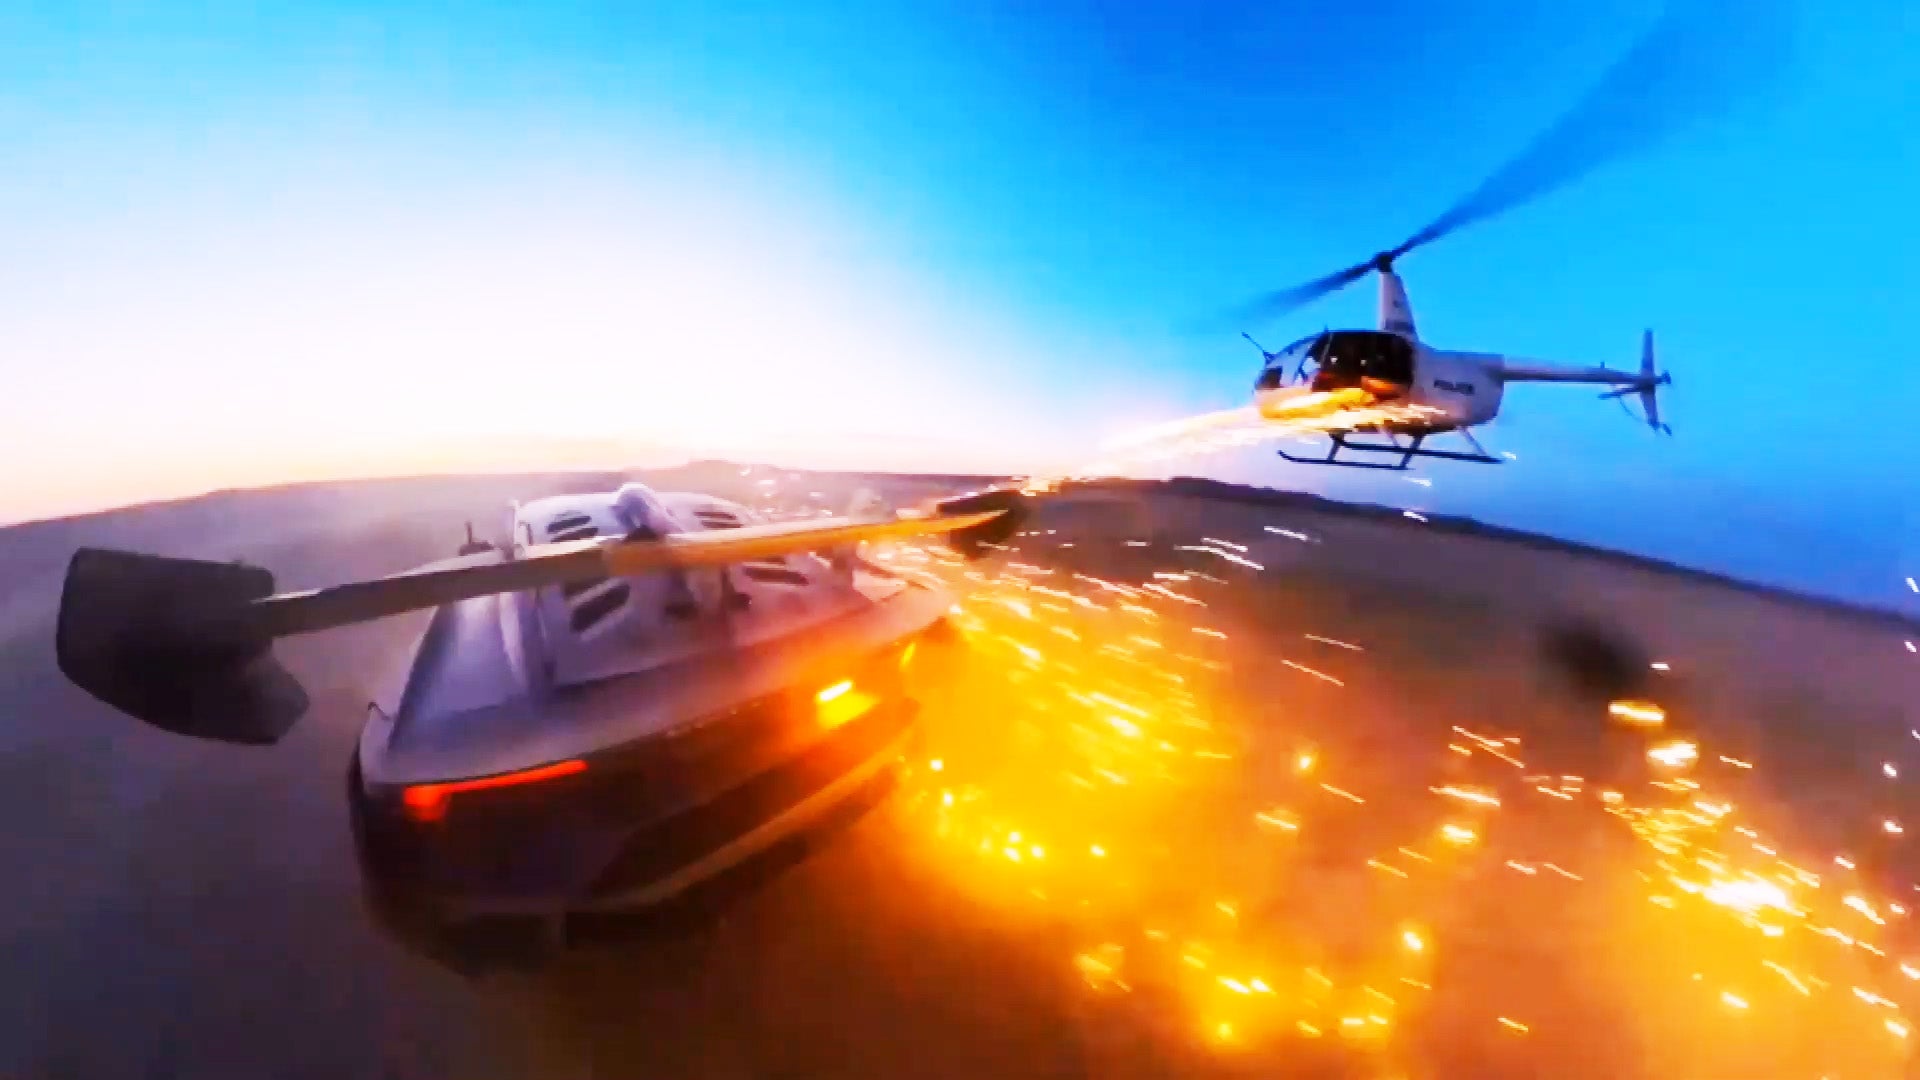 Helicopter fires fireworks towards Lamborghini 